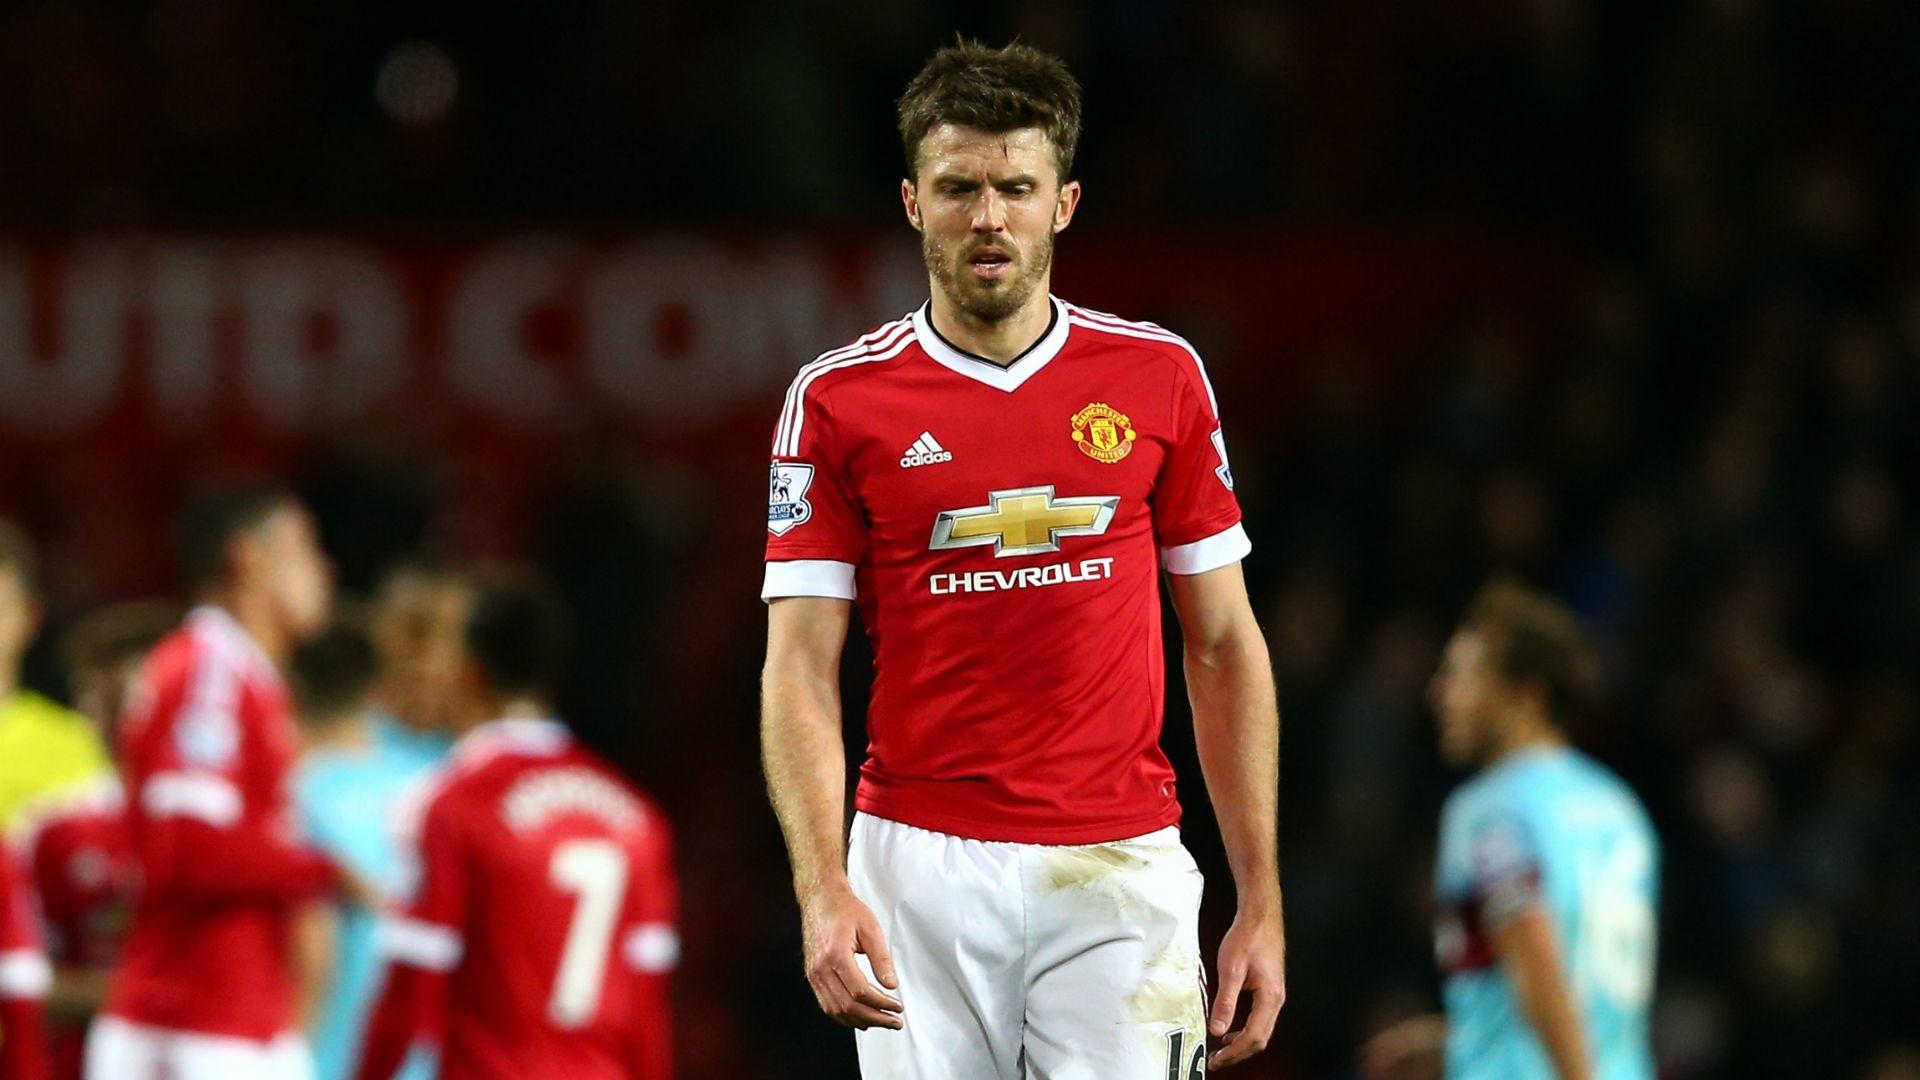 Carrick: Manchester United players are fighting for Van Gaal